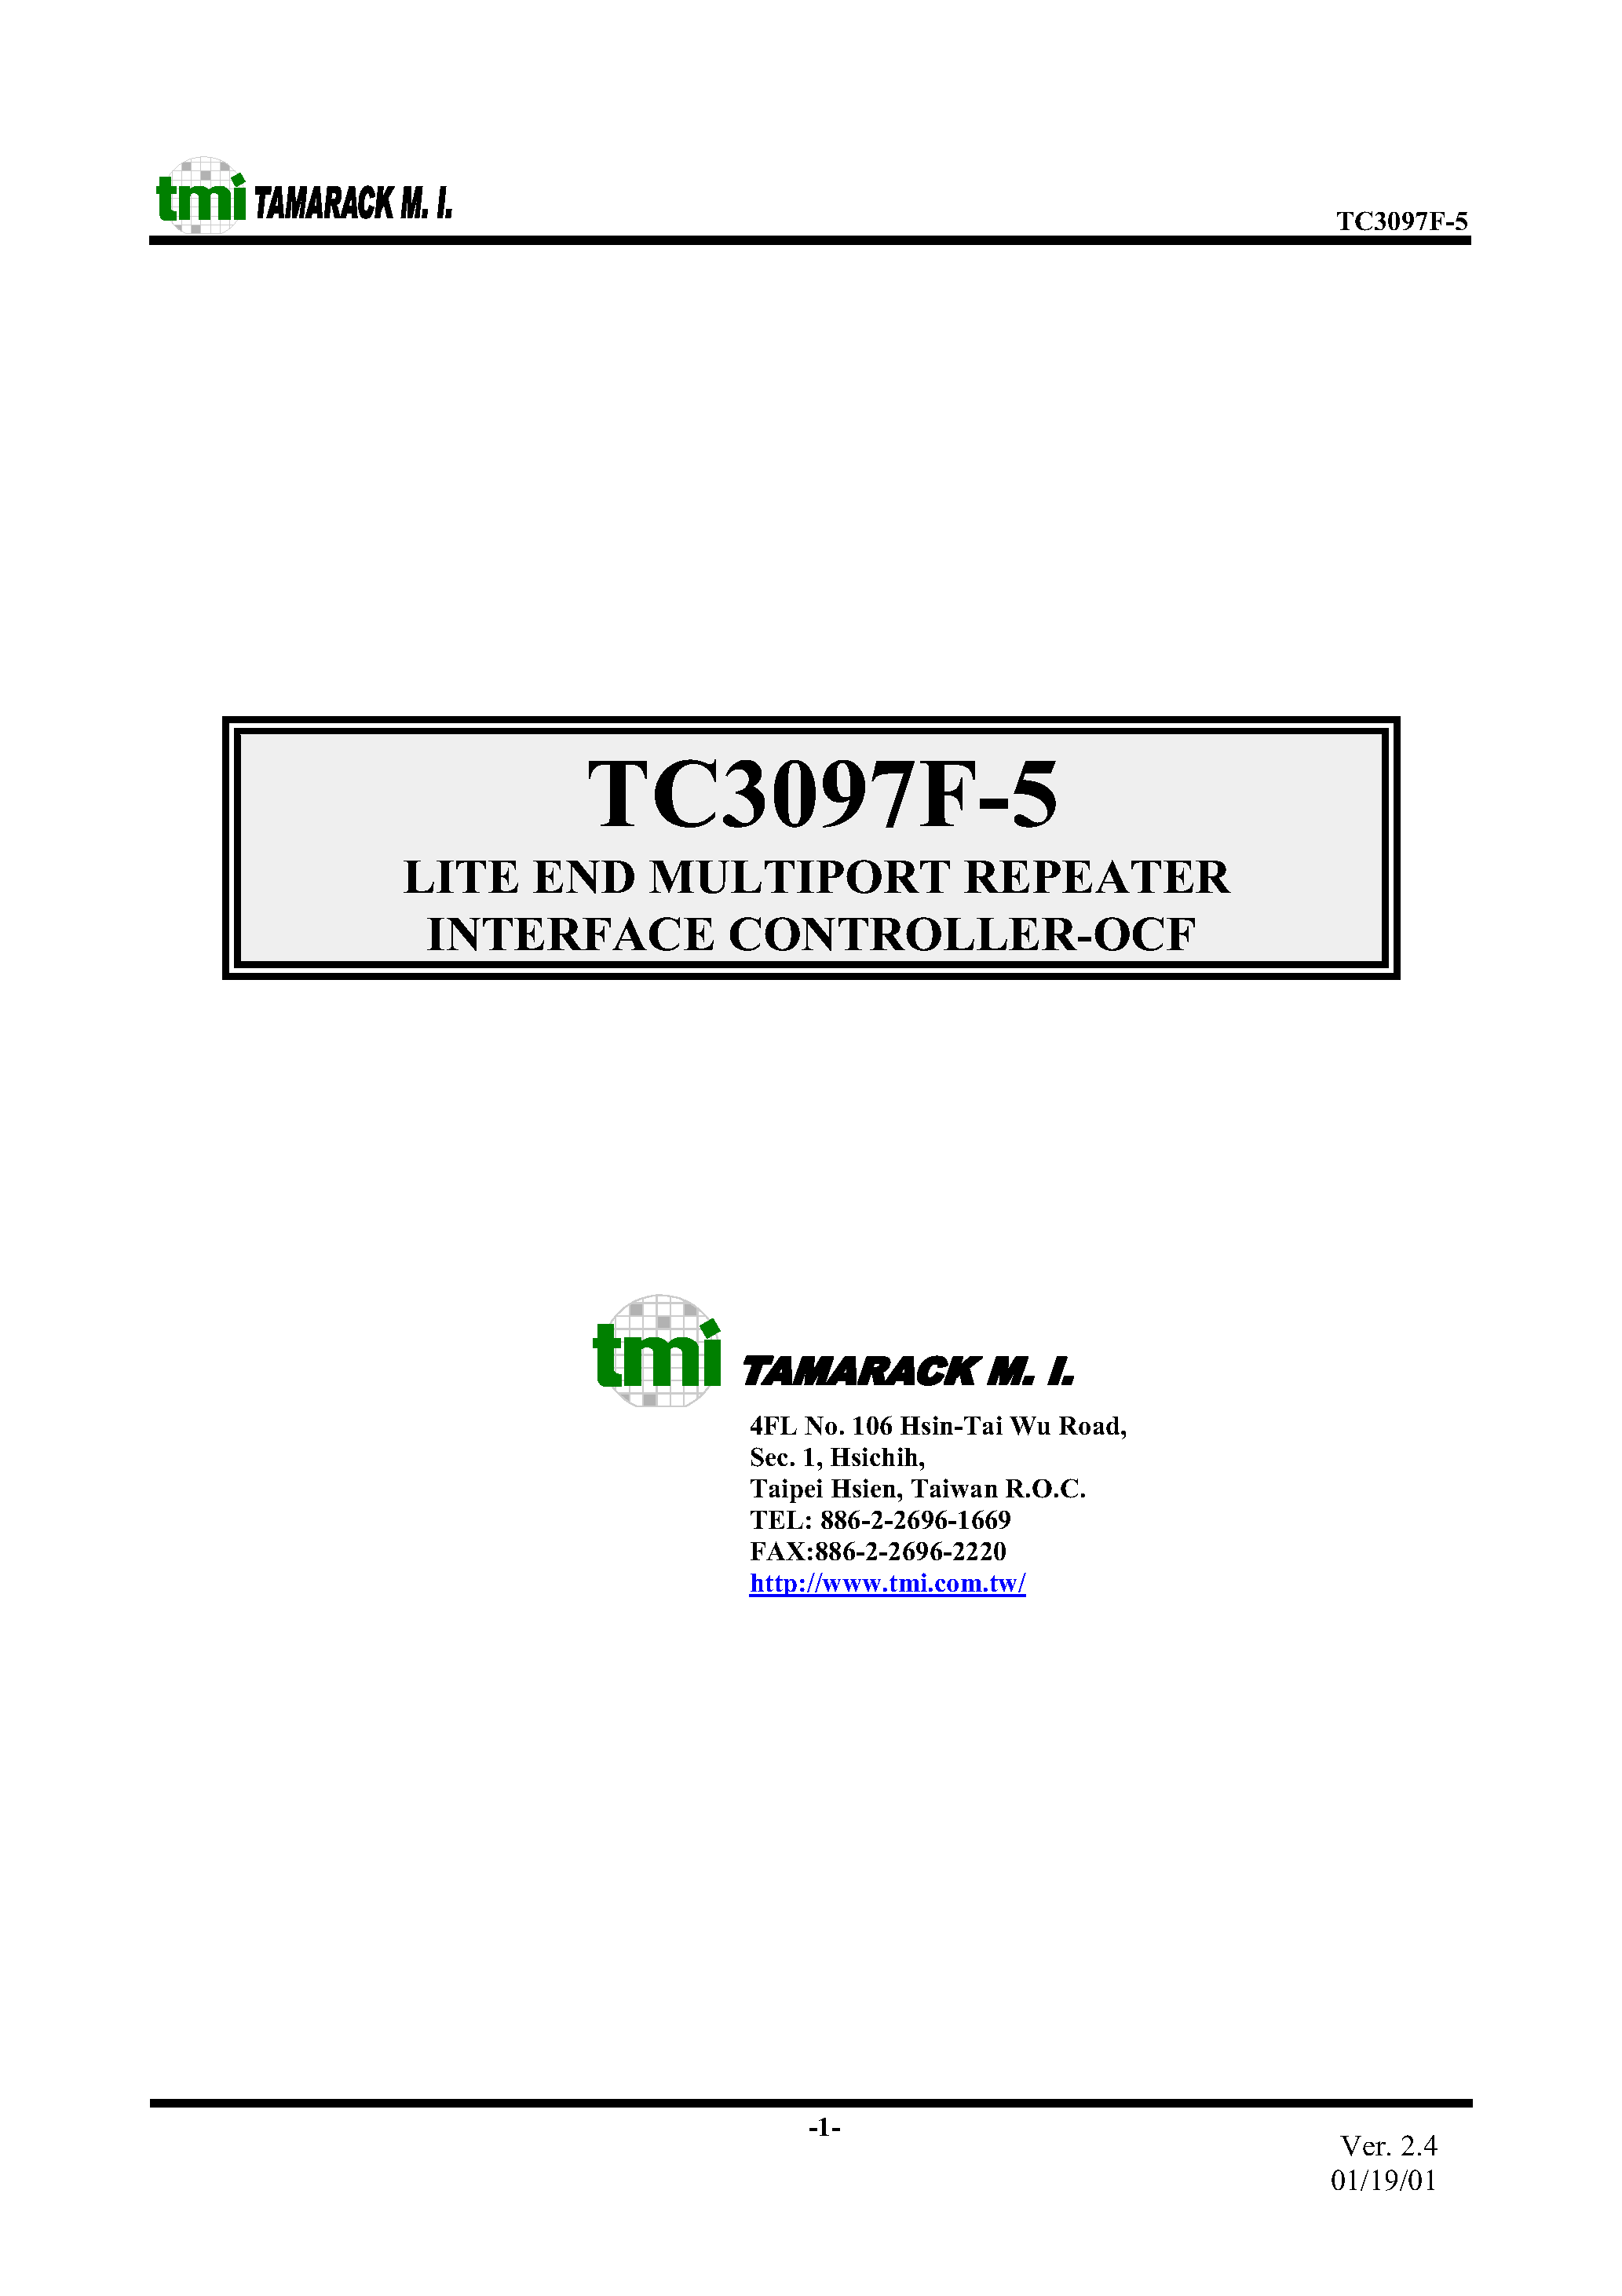 Даташит TC3097F-5 - LITE END MULTIPORT REPEATER INTERFACE CONTROLLER - OCF страница 1